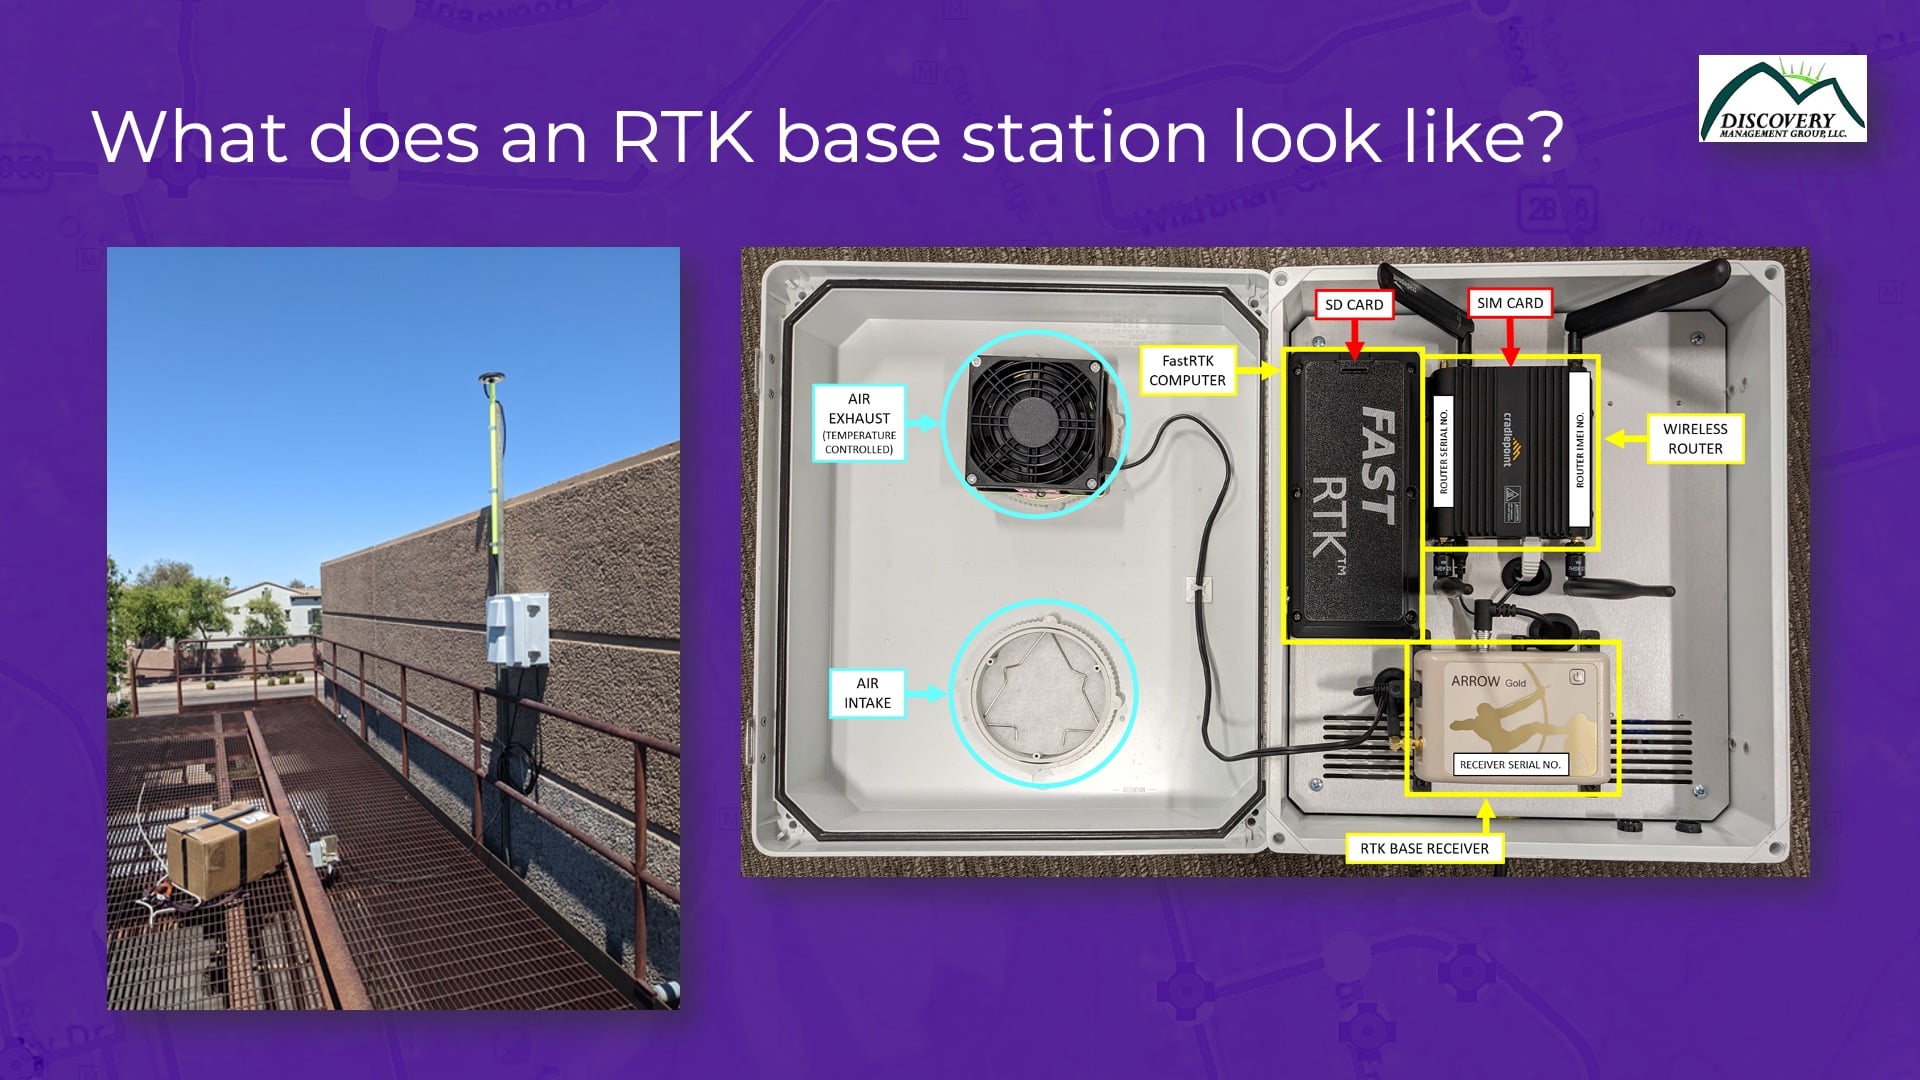 What does an RTK base station look like